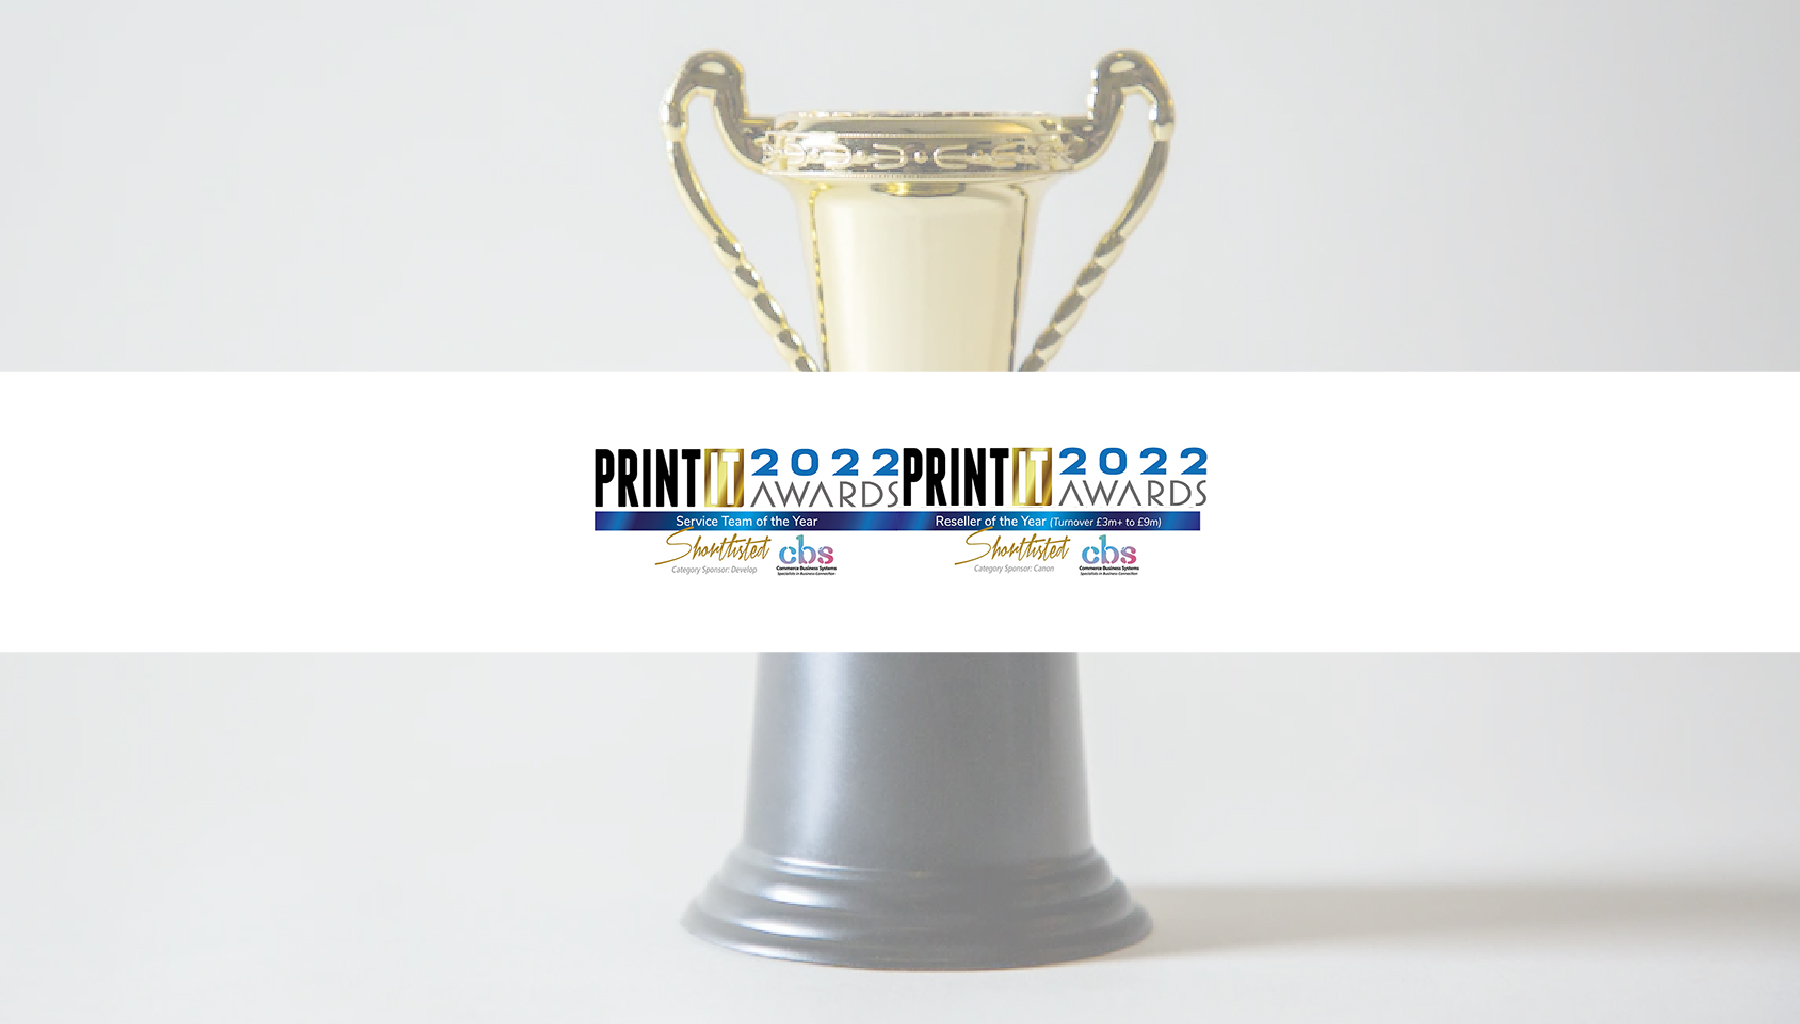 We are shortlisted for two awards at the National Print IT Awards 2022!